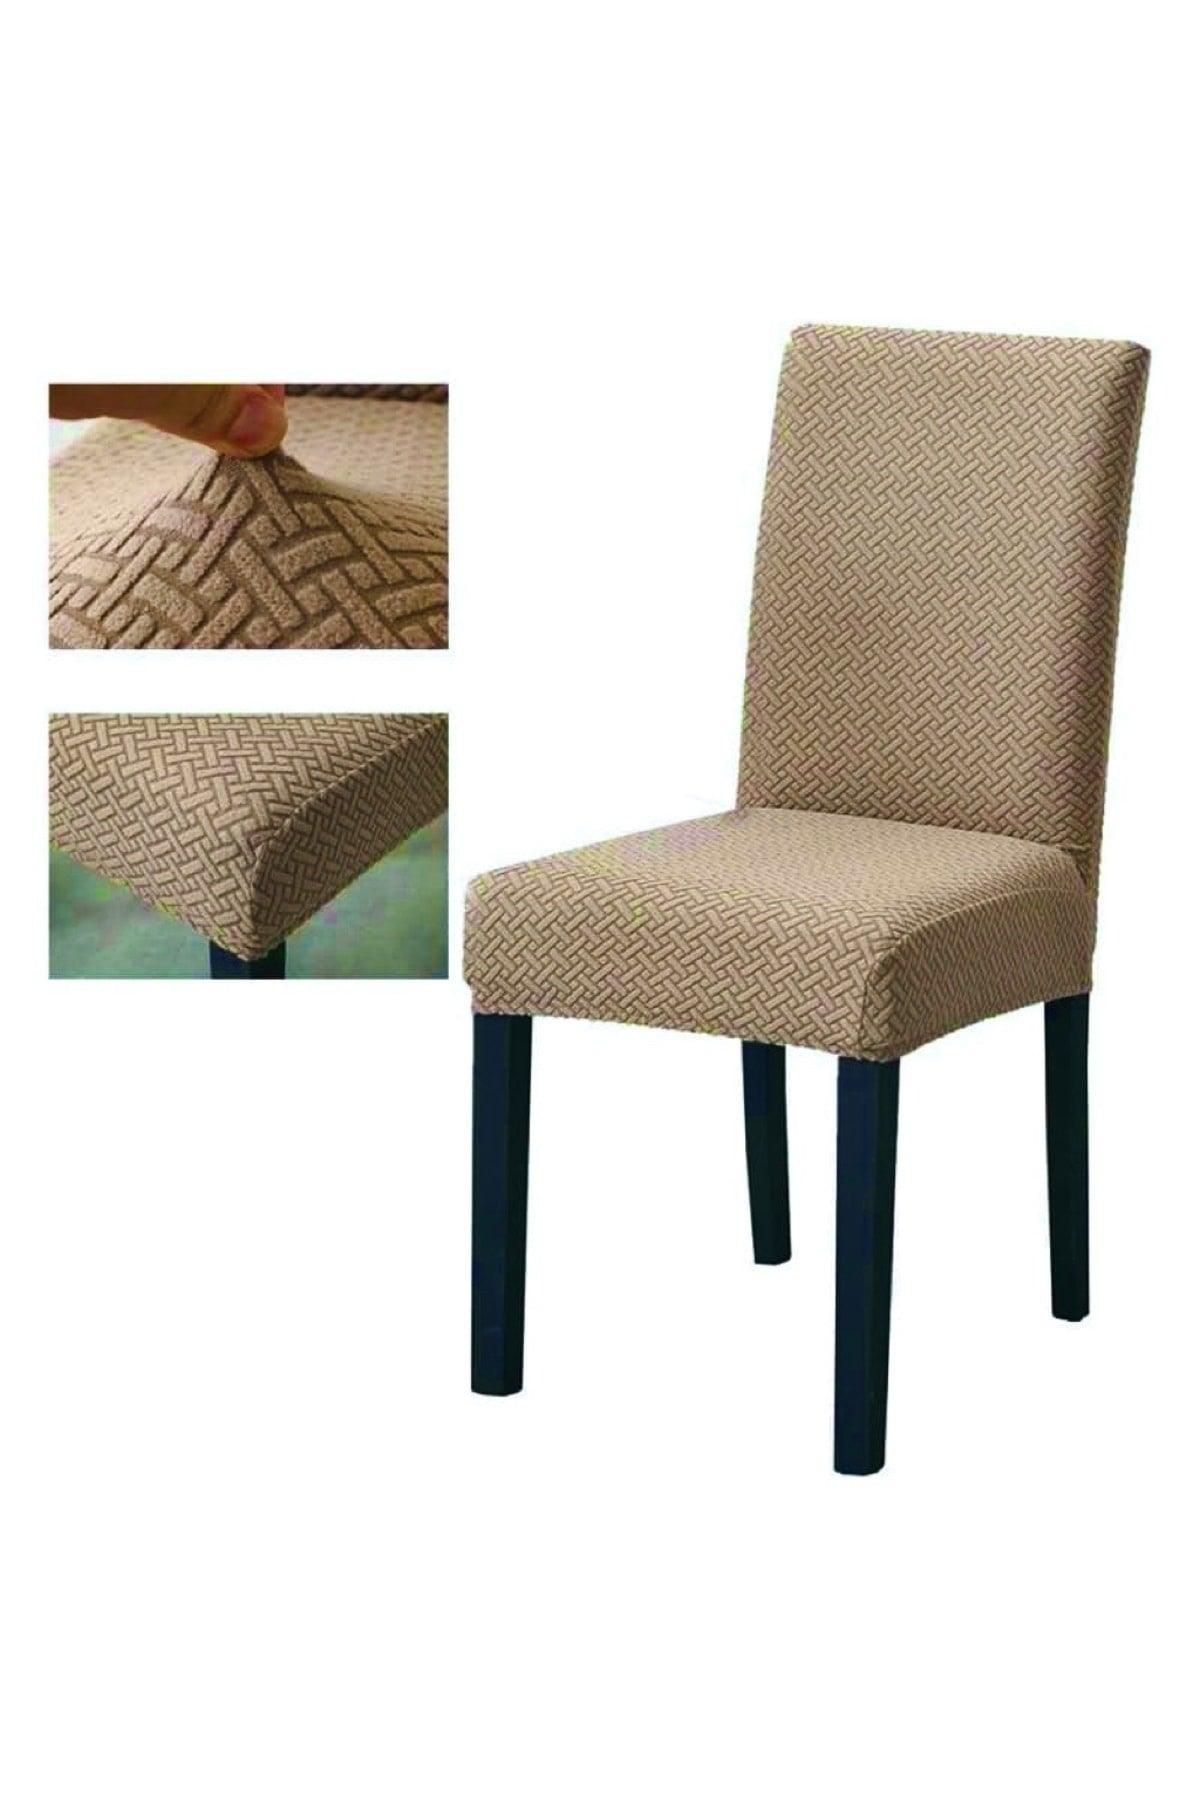 High Quality Chair Cover, Lycra, Washable 1 Piece Cappicino Color - Swordslife